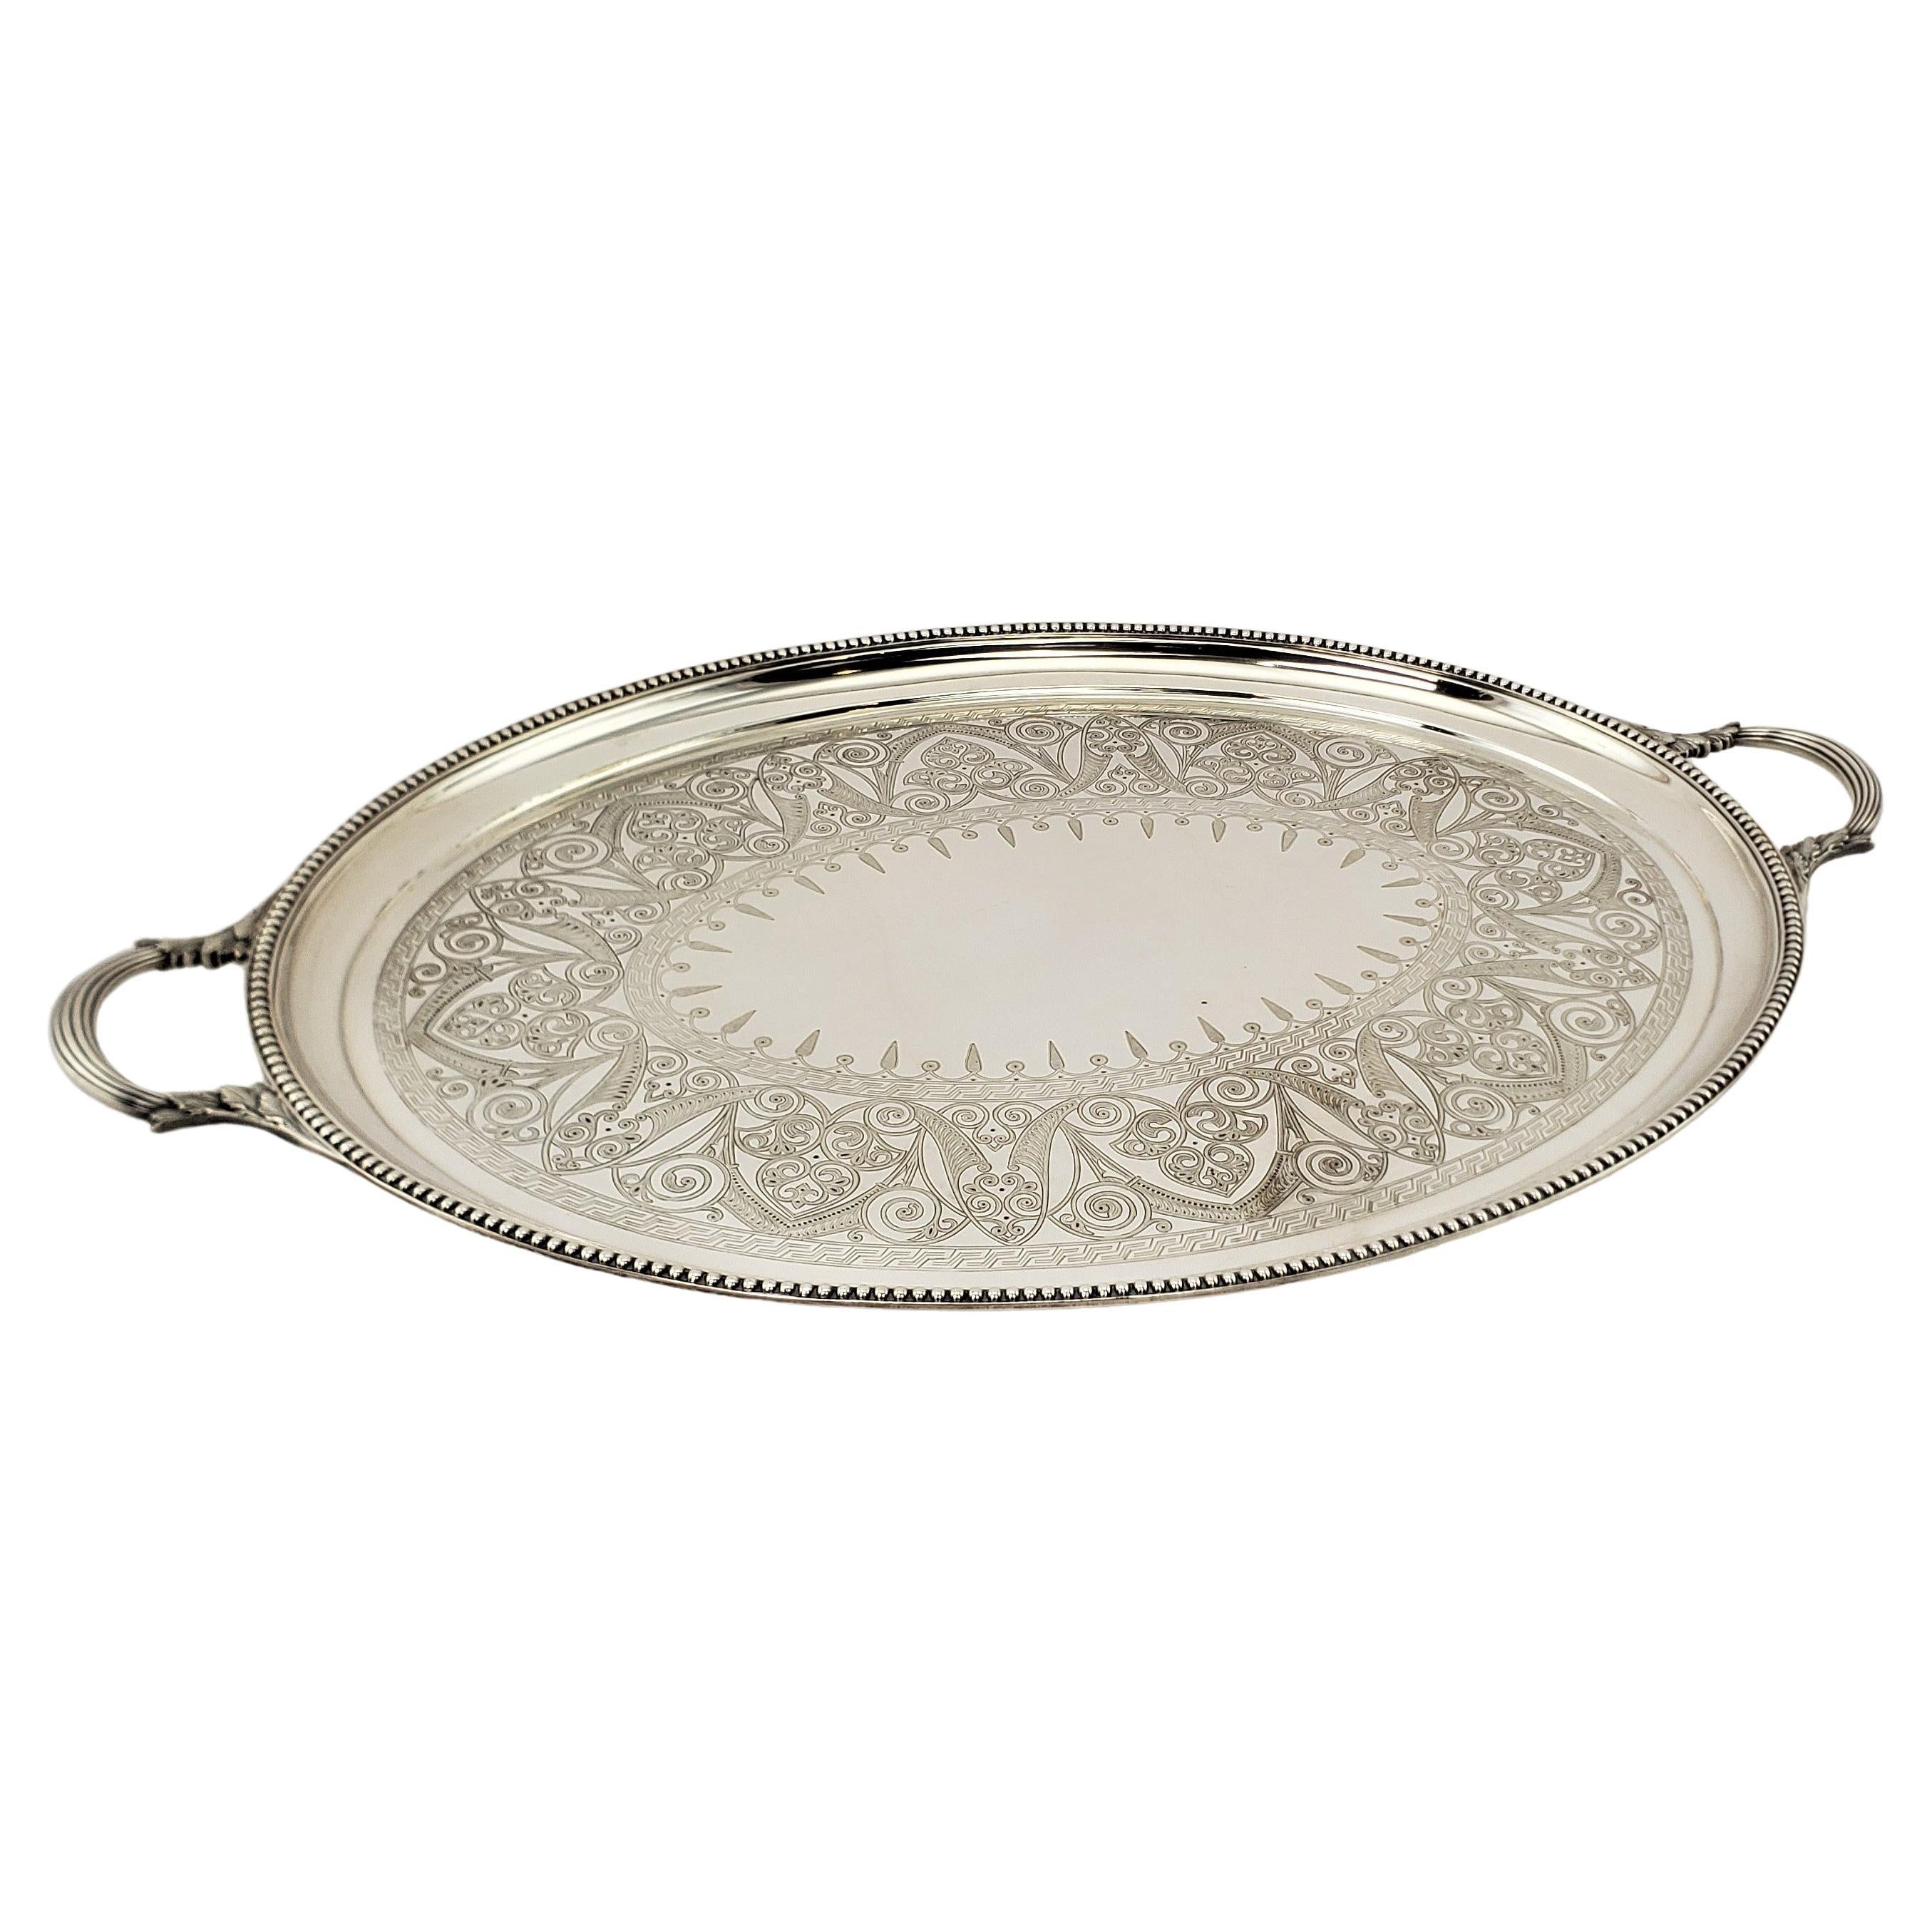 Large Antique Elkington Oval Silver Plated Serving Tray with Floral Engraving